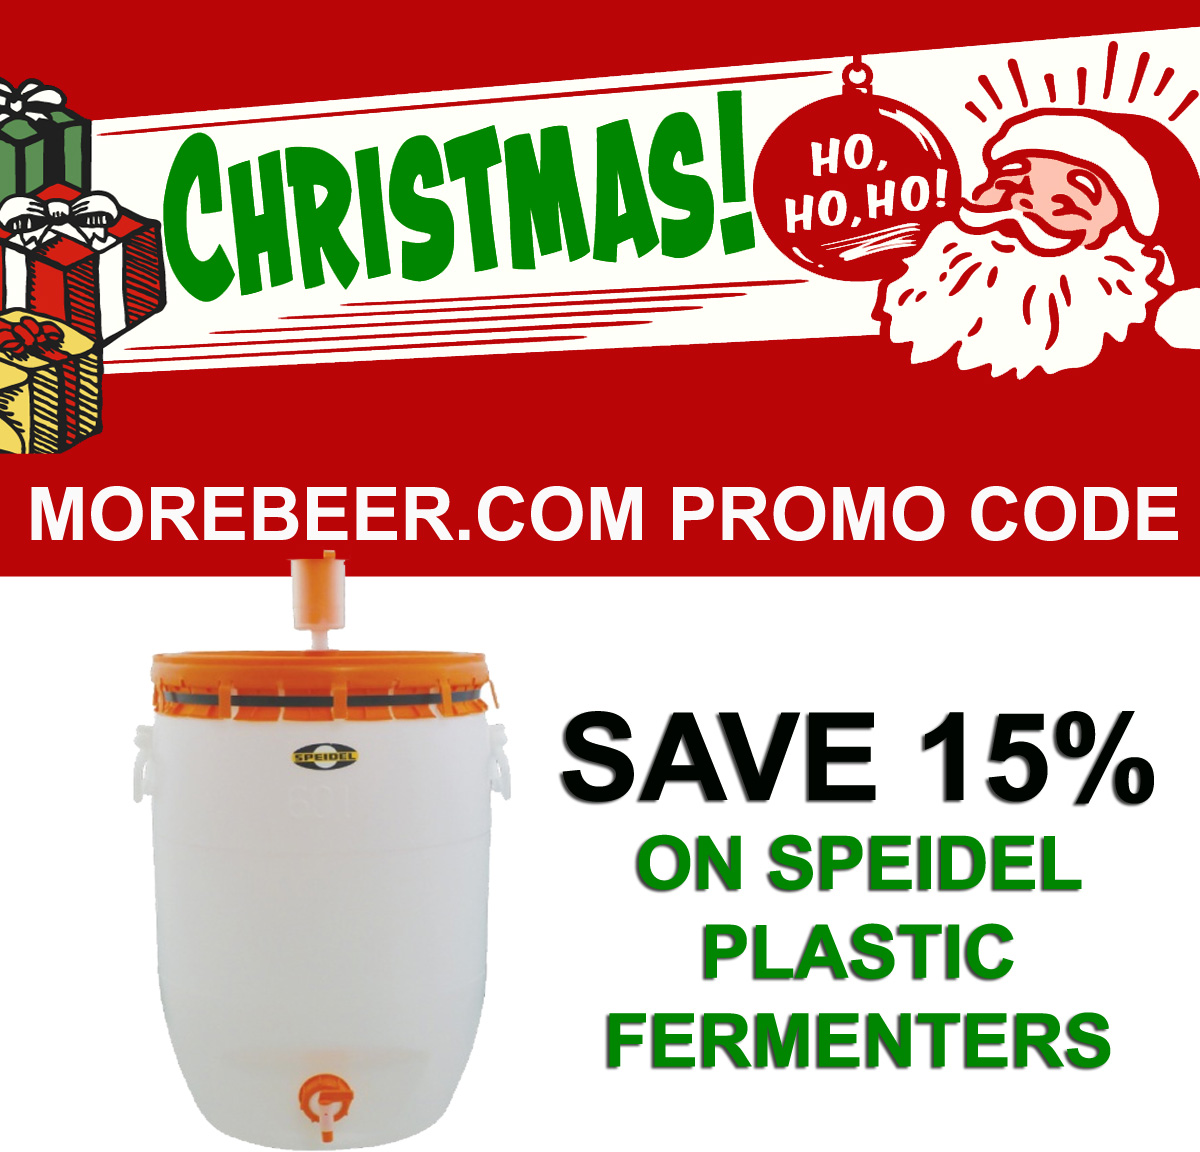  Home Brewer Promo Code for Save 15% On Speidel Plastic Fermenters at More Beer Coupon Code